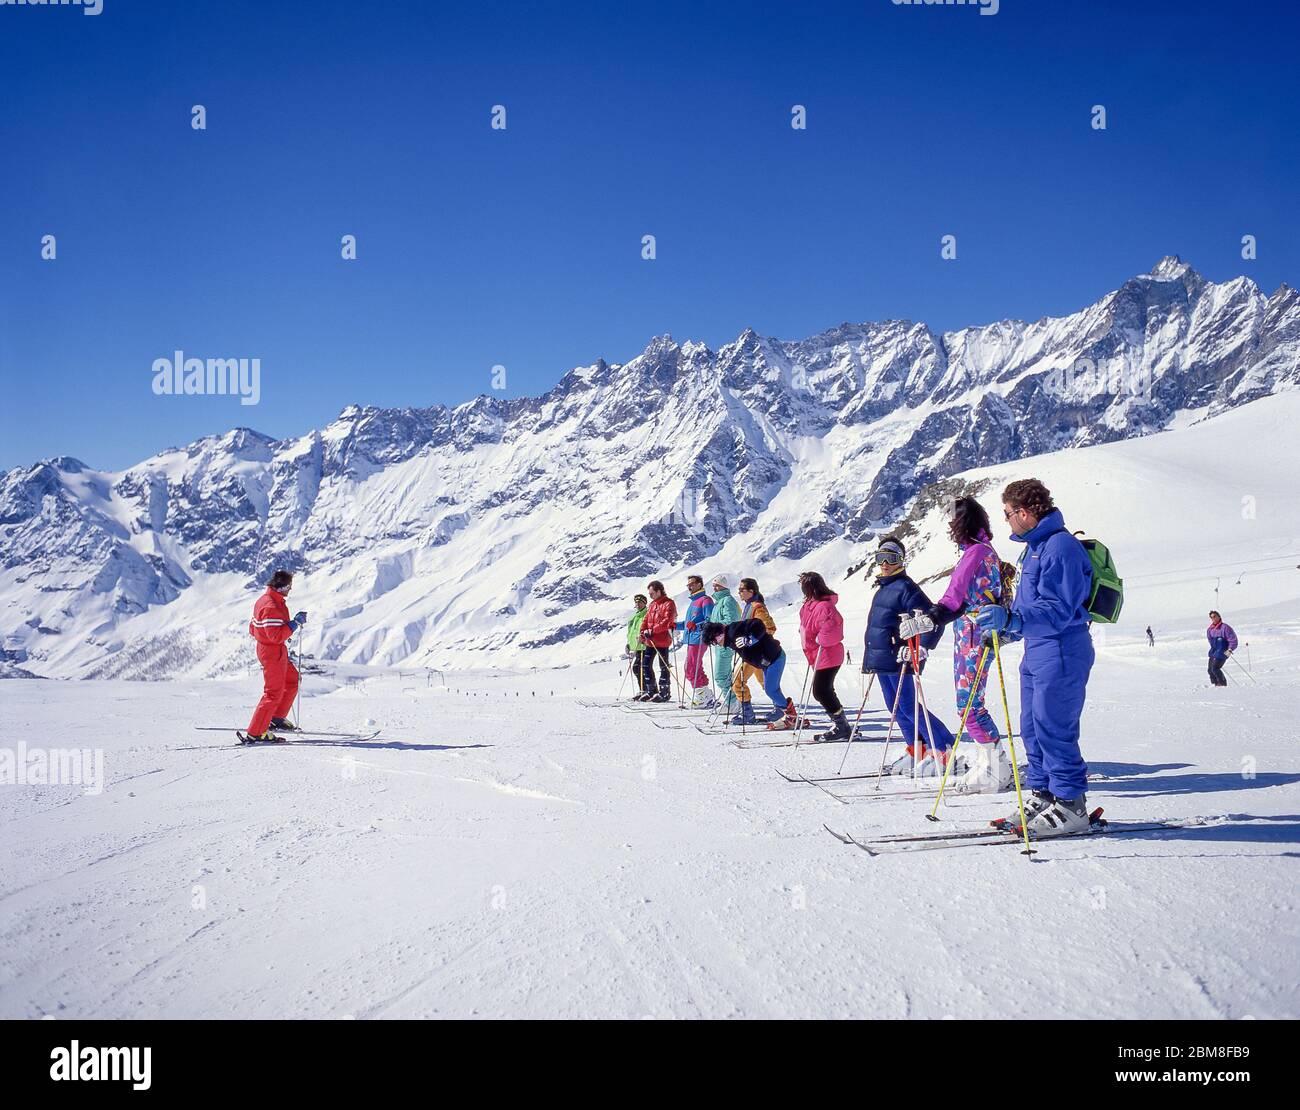 Ski instructor with group on piste, Breuil-Cervinia, Aosta Valley, Italy Stock Photo